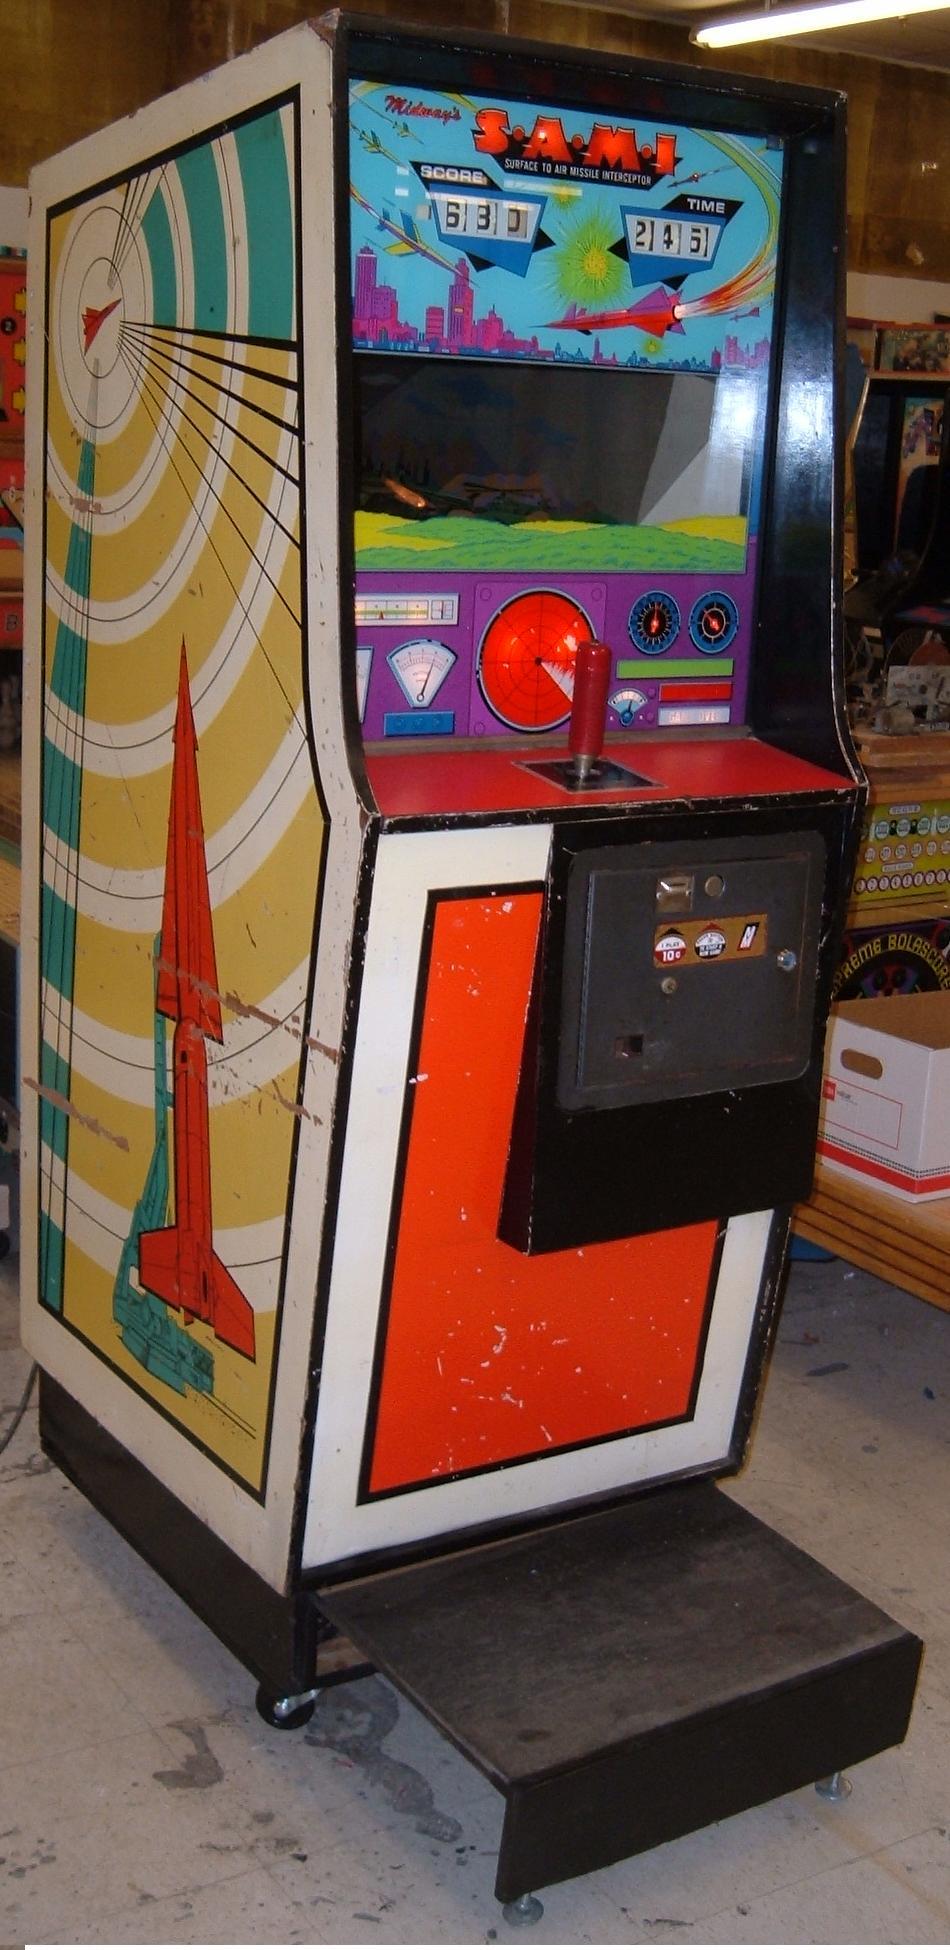 1970 Midway SAMI S.A.M.I. coin operated arcade game